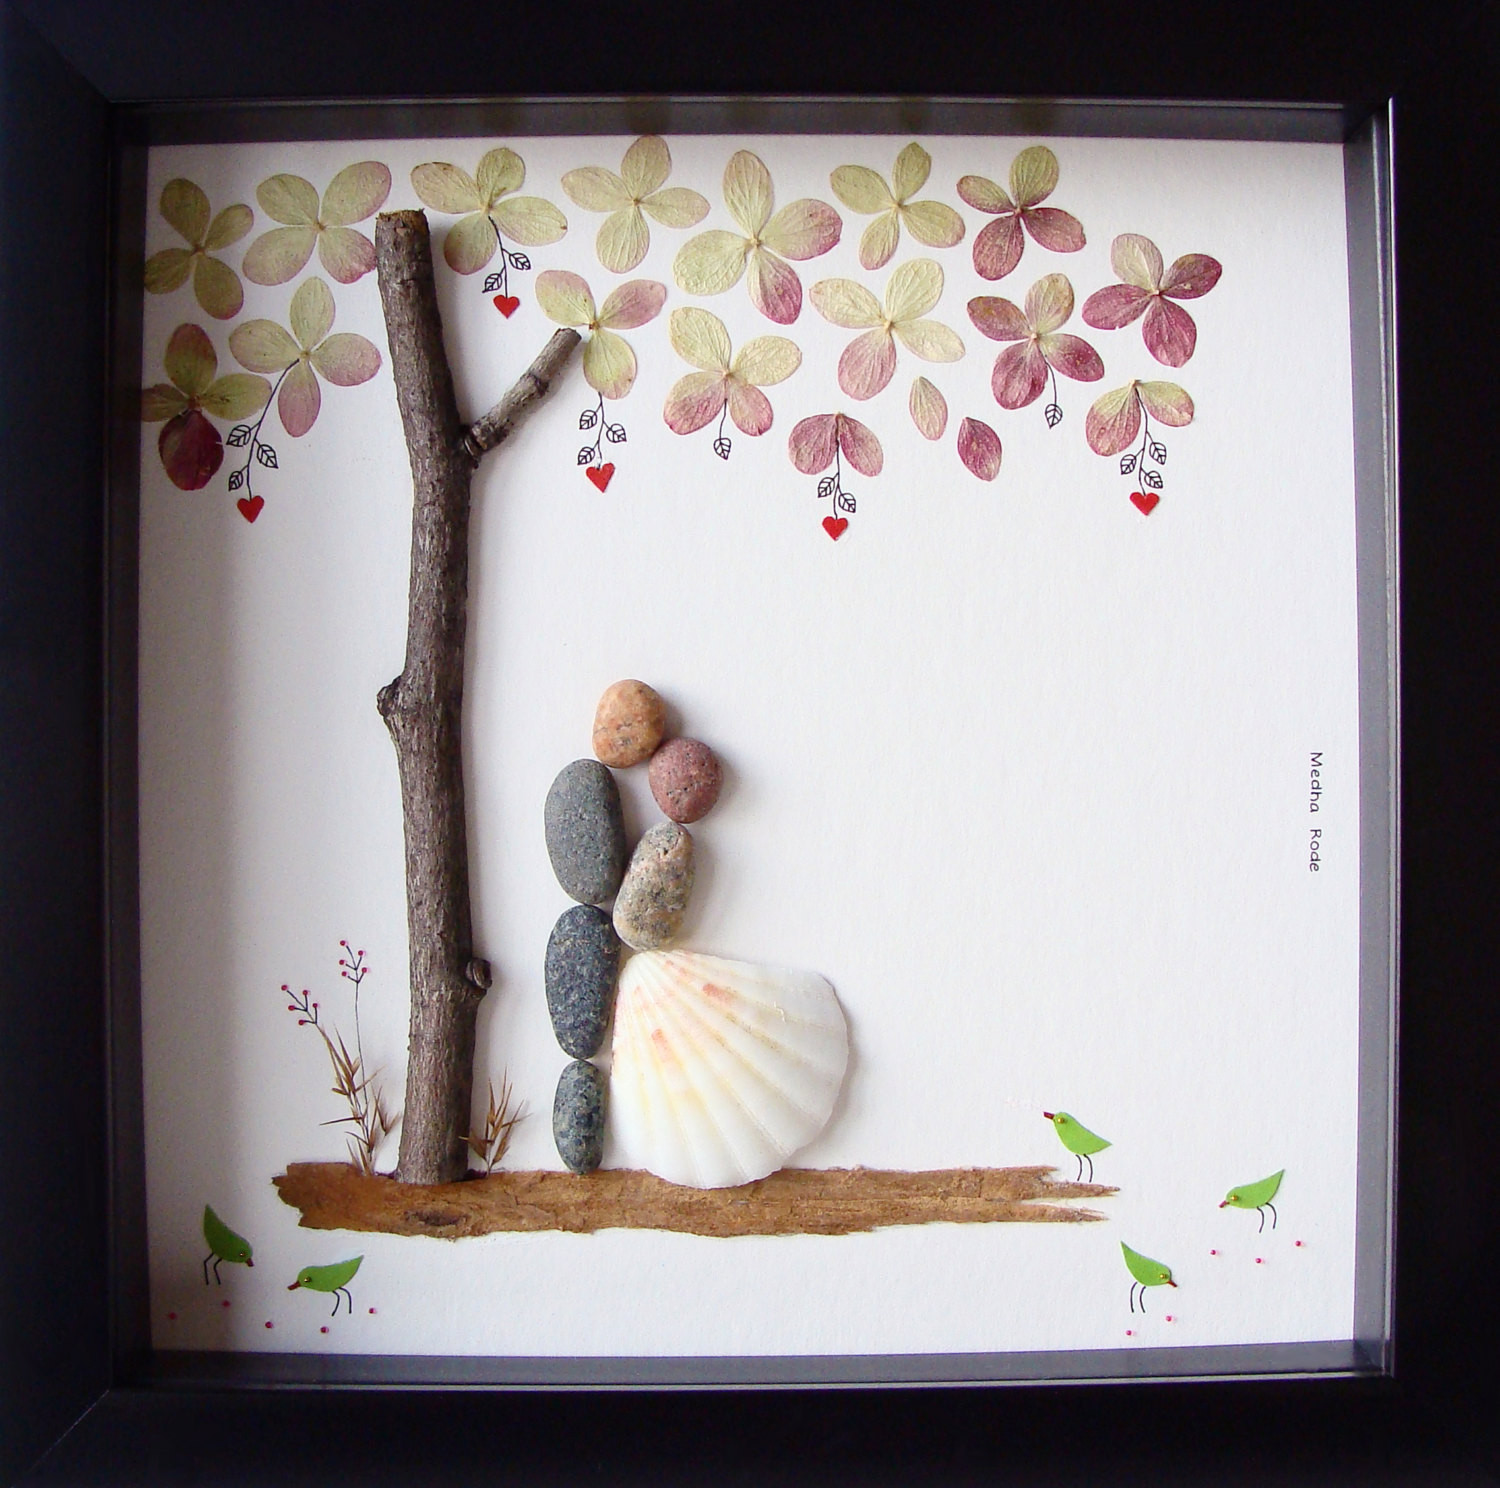 Cool Wedding Gift Ideas For Couples
 Unique Wedding Gift For Couple Wedding Pebble Art by MedhaRode